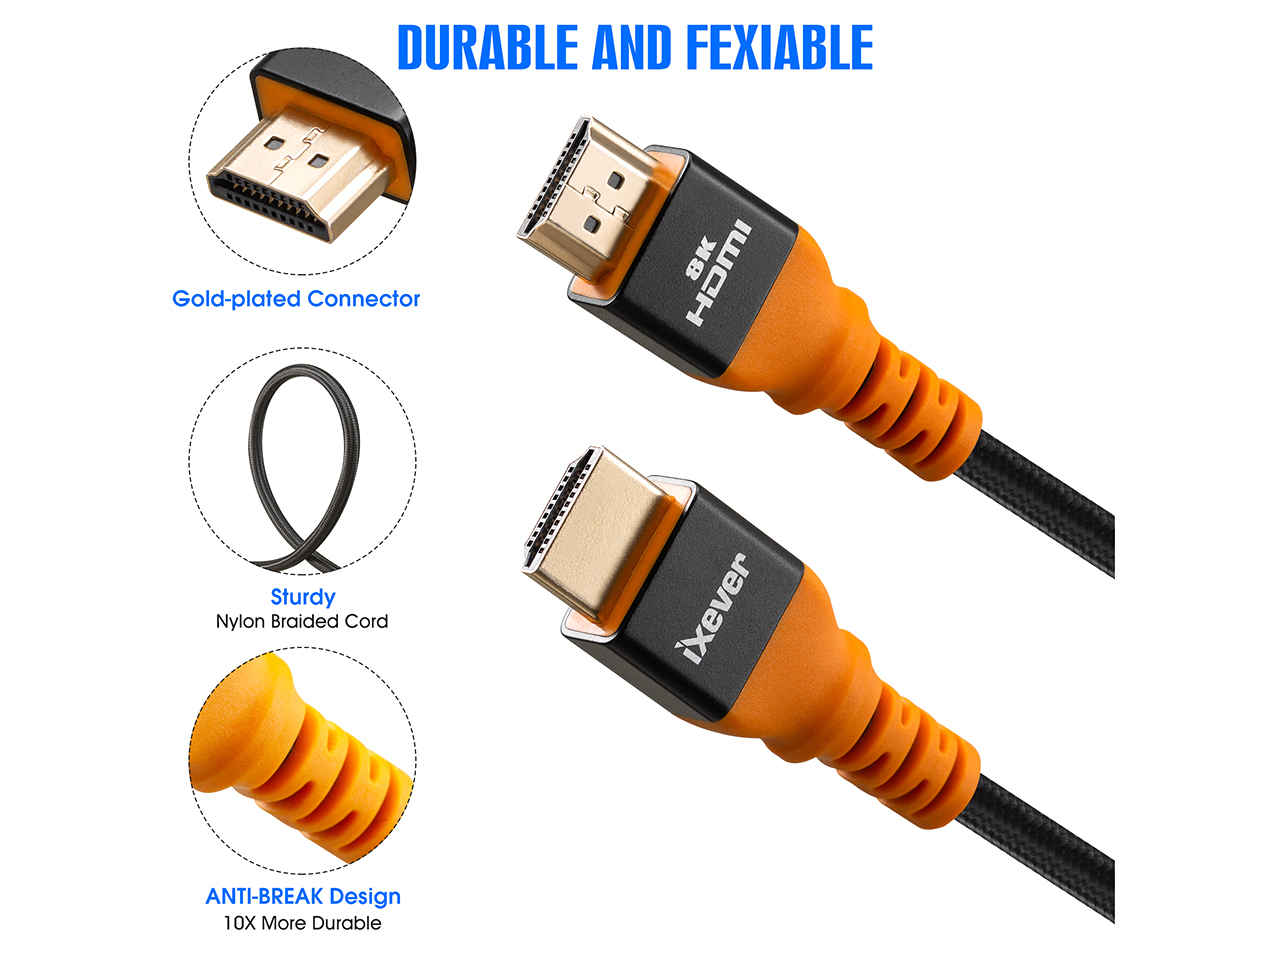 Omni Gear 8K HDMI 2.1 Cable 48Gbps 10ft Certified Ultra High Speed 4K 120Hz  8K 60Hz 144Hz eARC HDR HDCP 2.2 2.3 Compatible with Dolby Vision Apple TV  4K Roku Sony Samsung